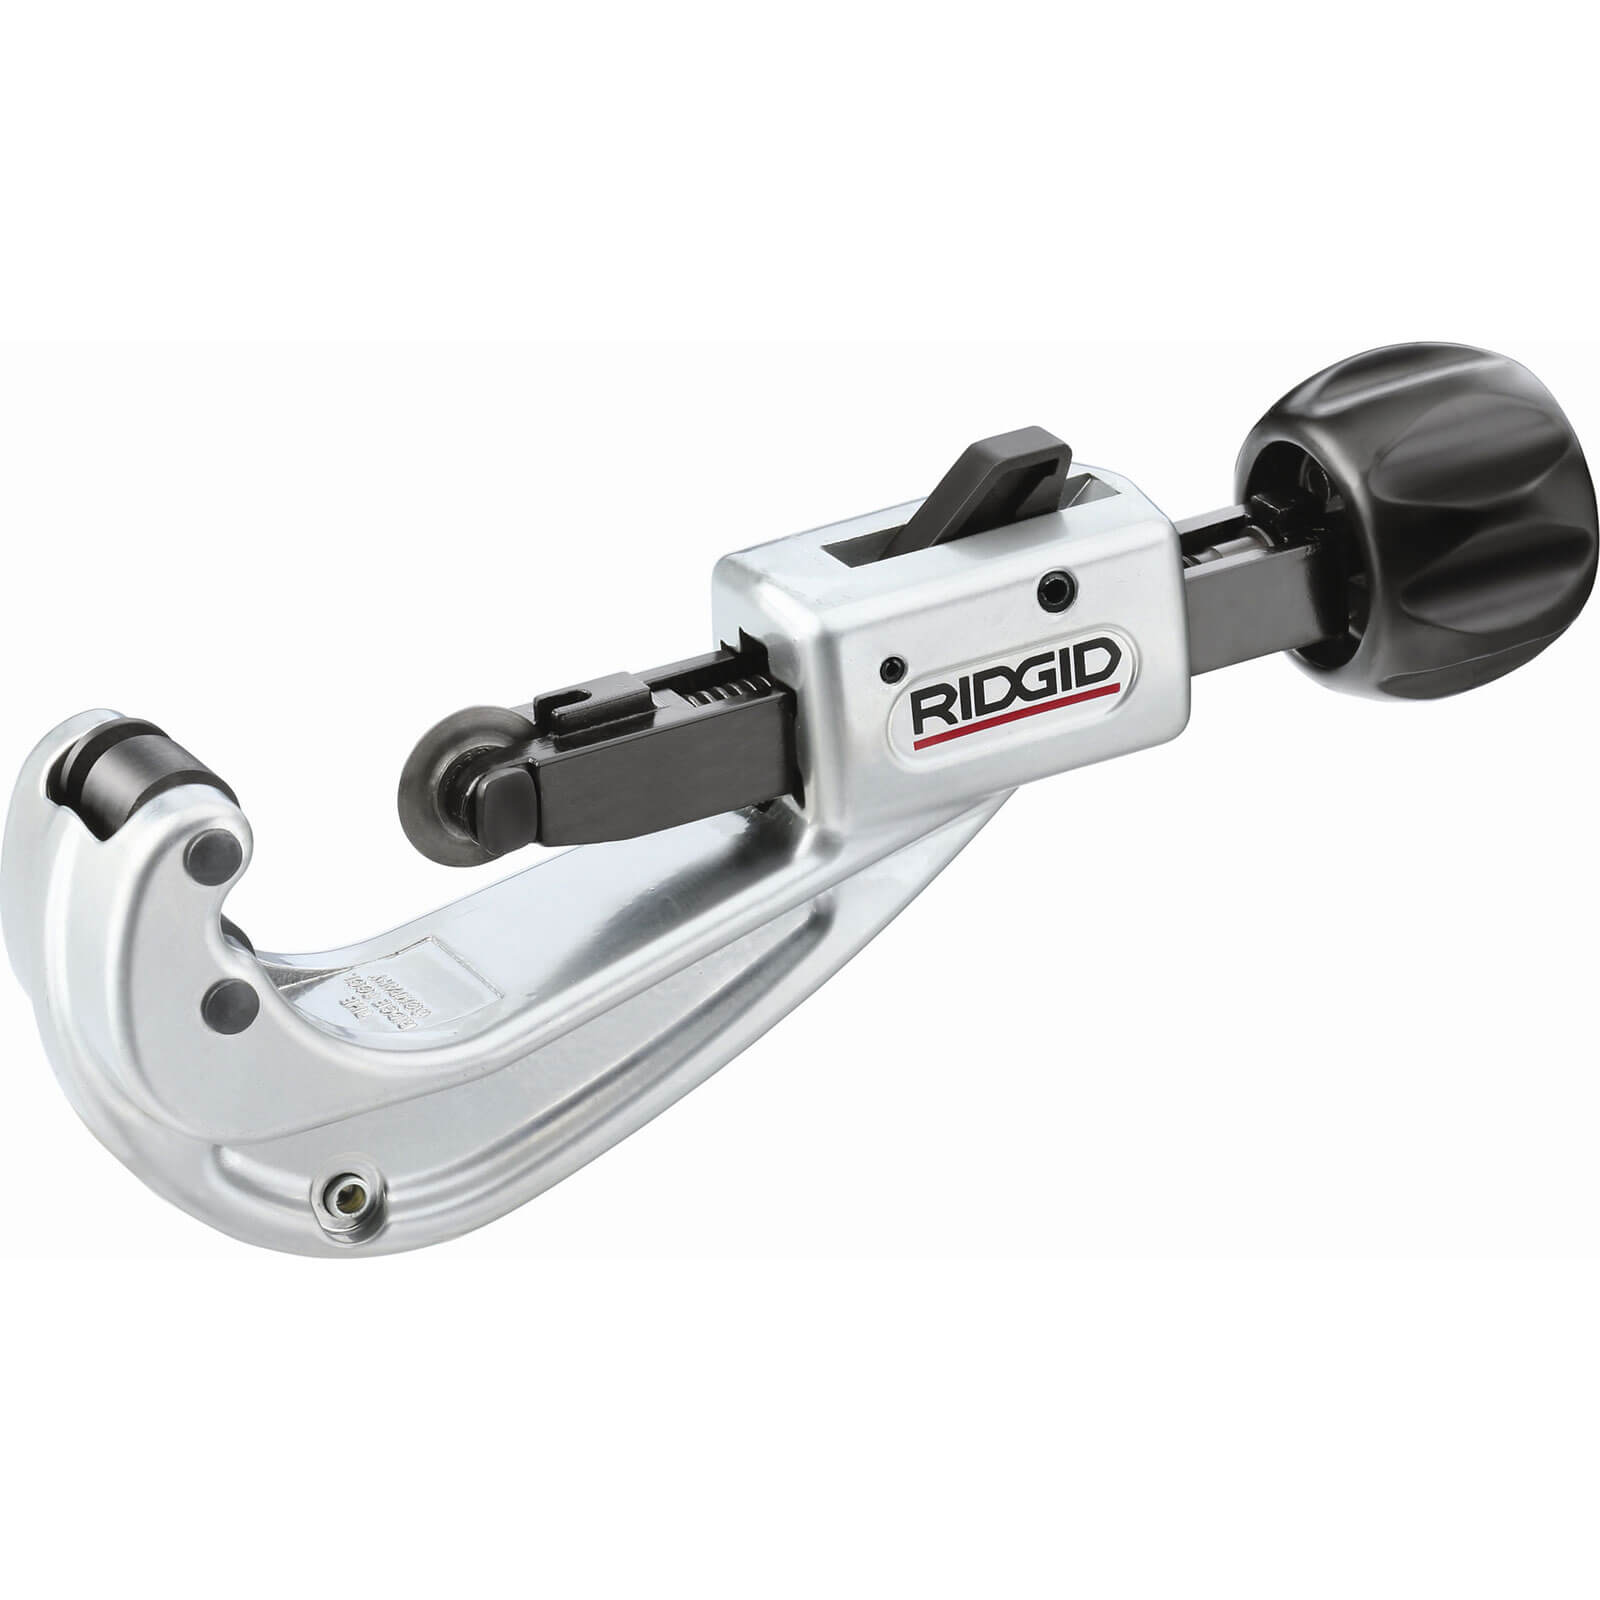 Image of Ridgid Quick Acting Copper Pipe Cutter 48mm - 116mm